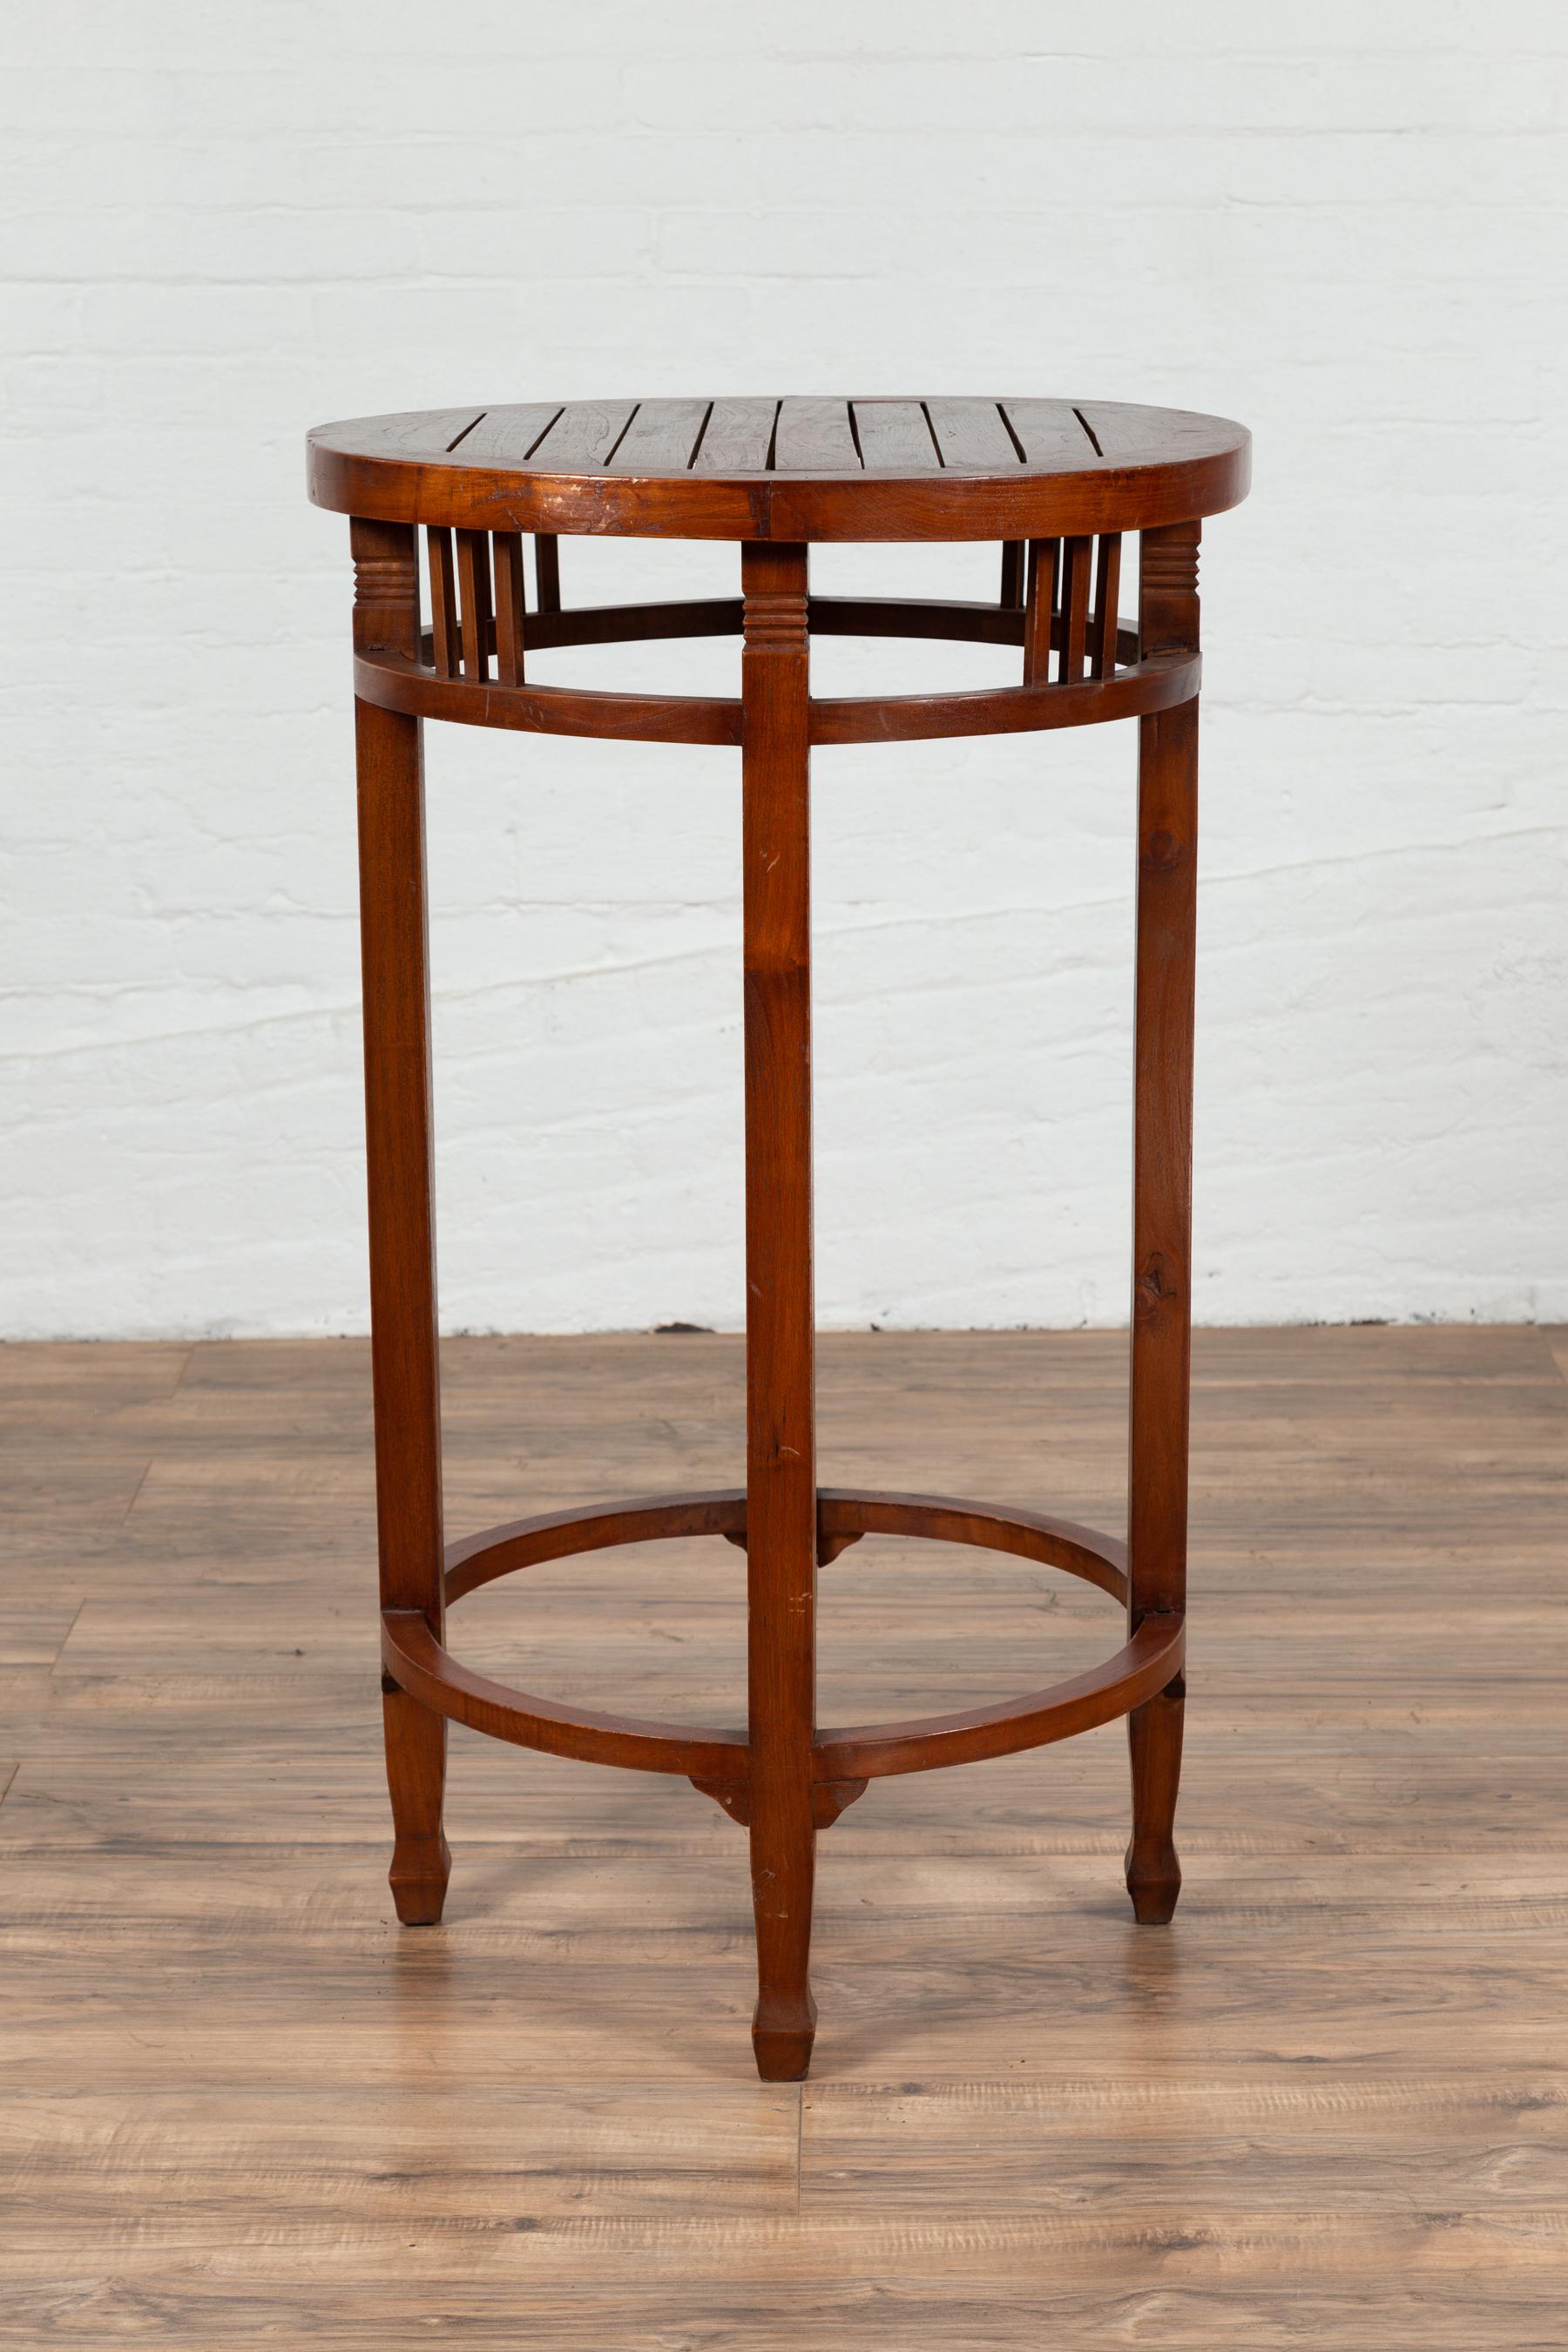 19th Century Indonesian Round Pedestal Table with Pierced Apron and Stretchers For Sale 5